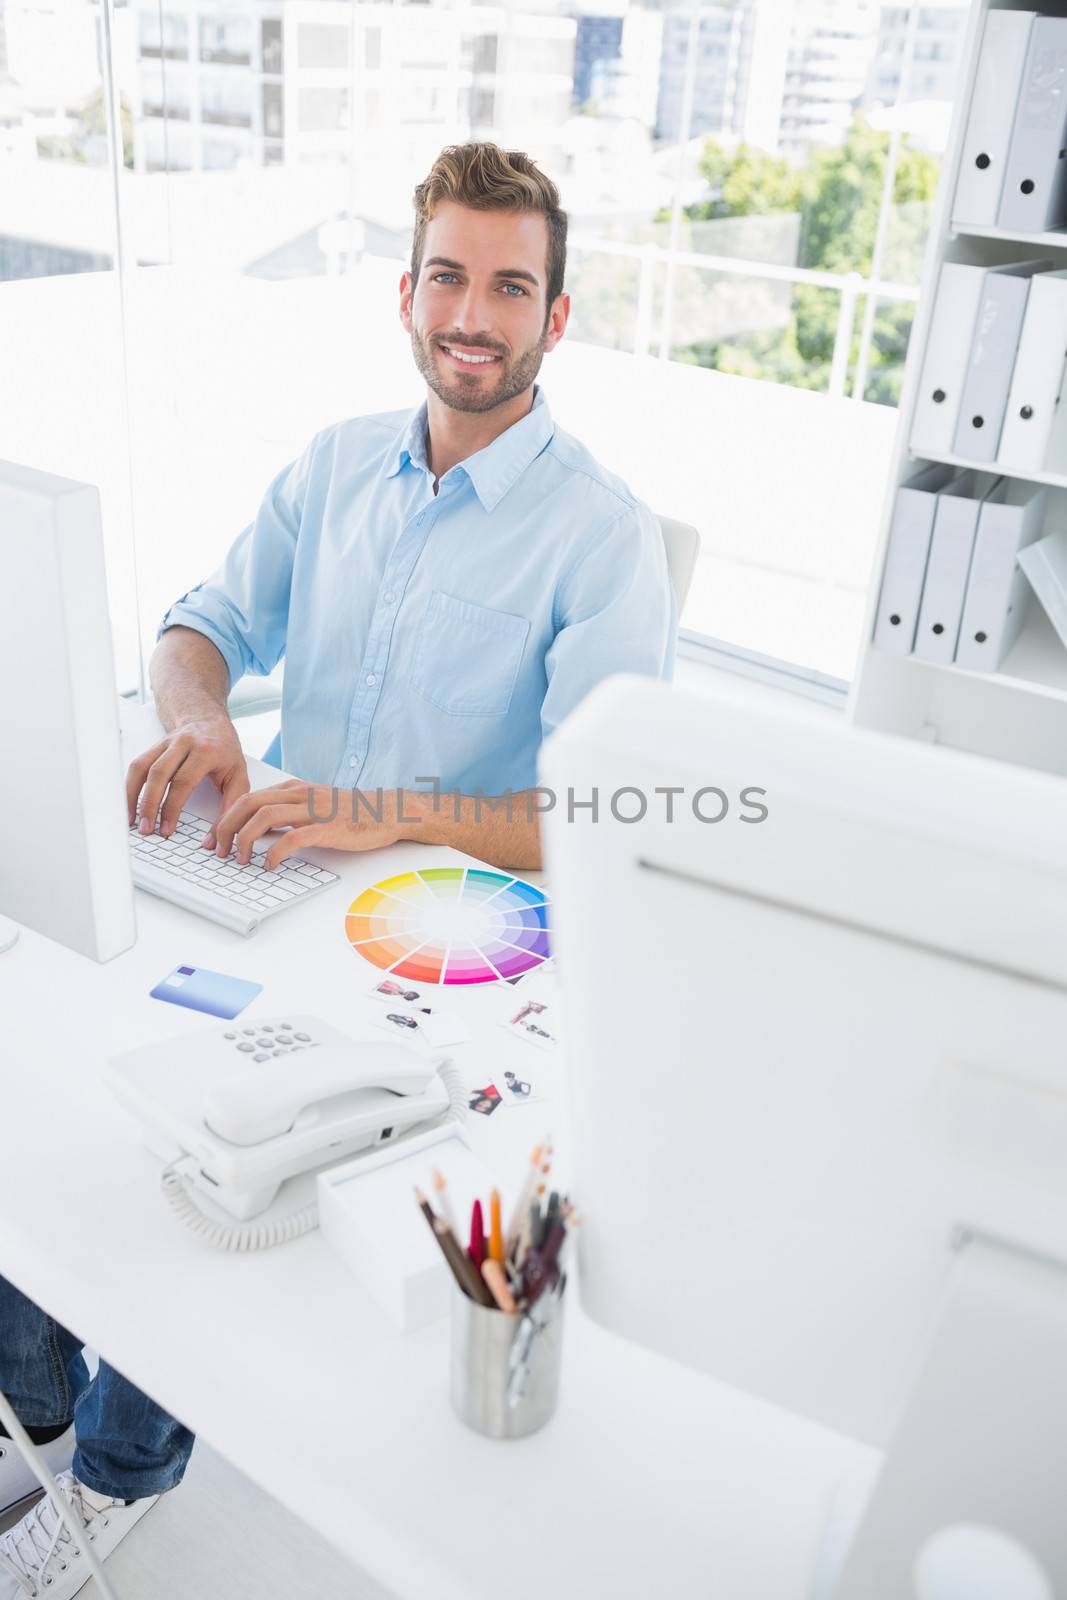 Portrait of a smiling casual male photo editor using computer in the office